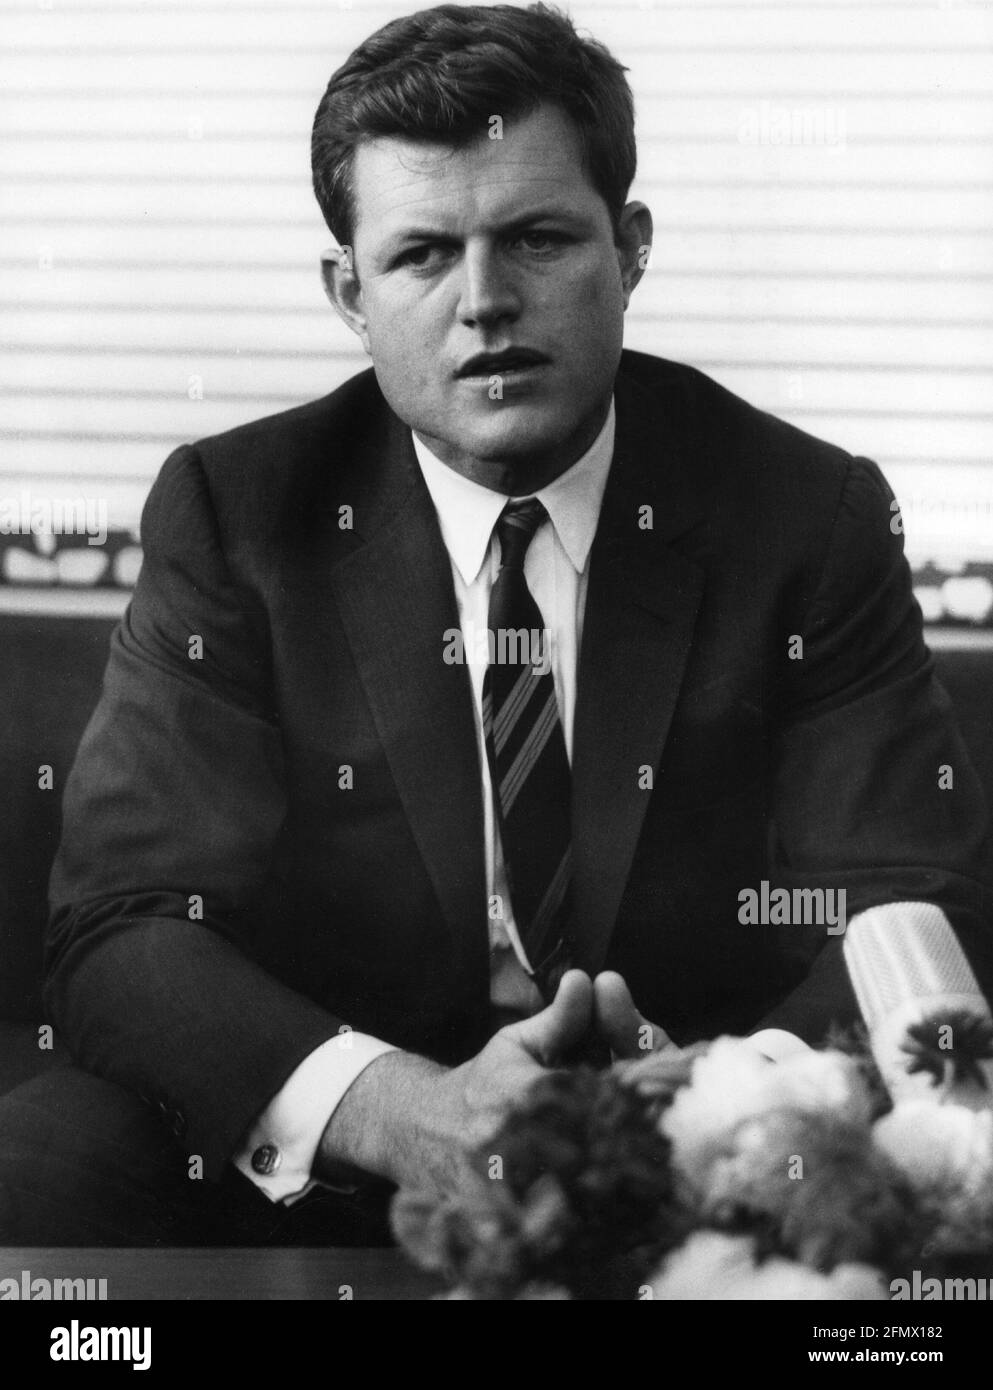 Kennedy, Edward Moore, 22.2.1932 - 25.8.2009, politico americano, ADDITIONAL-RIGHTS-CLEARANCE-INFO-NOT-AVAILABLE Foto Stock